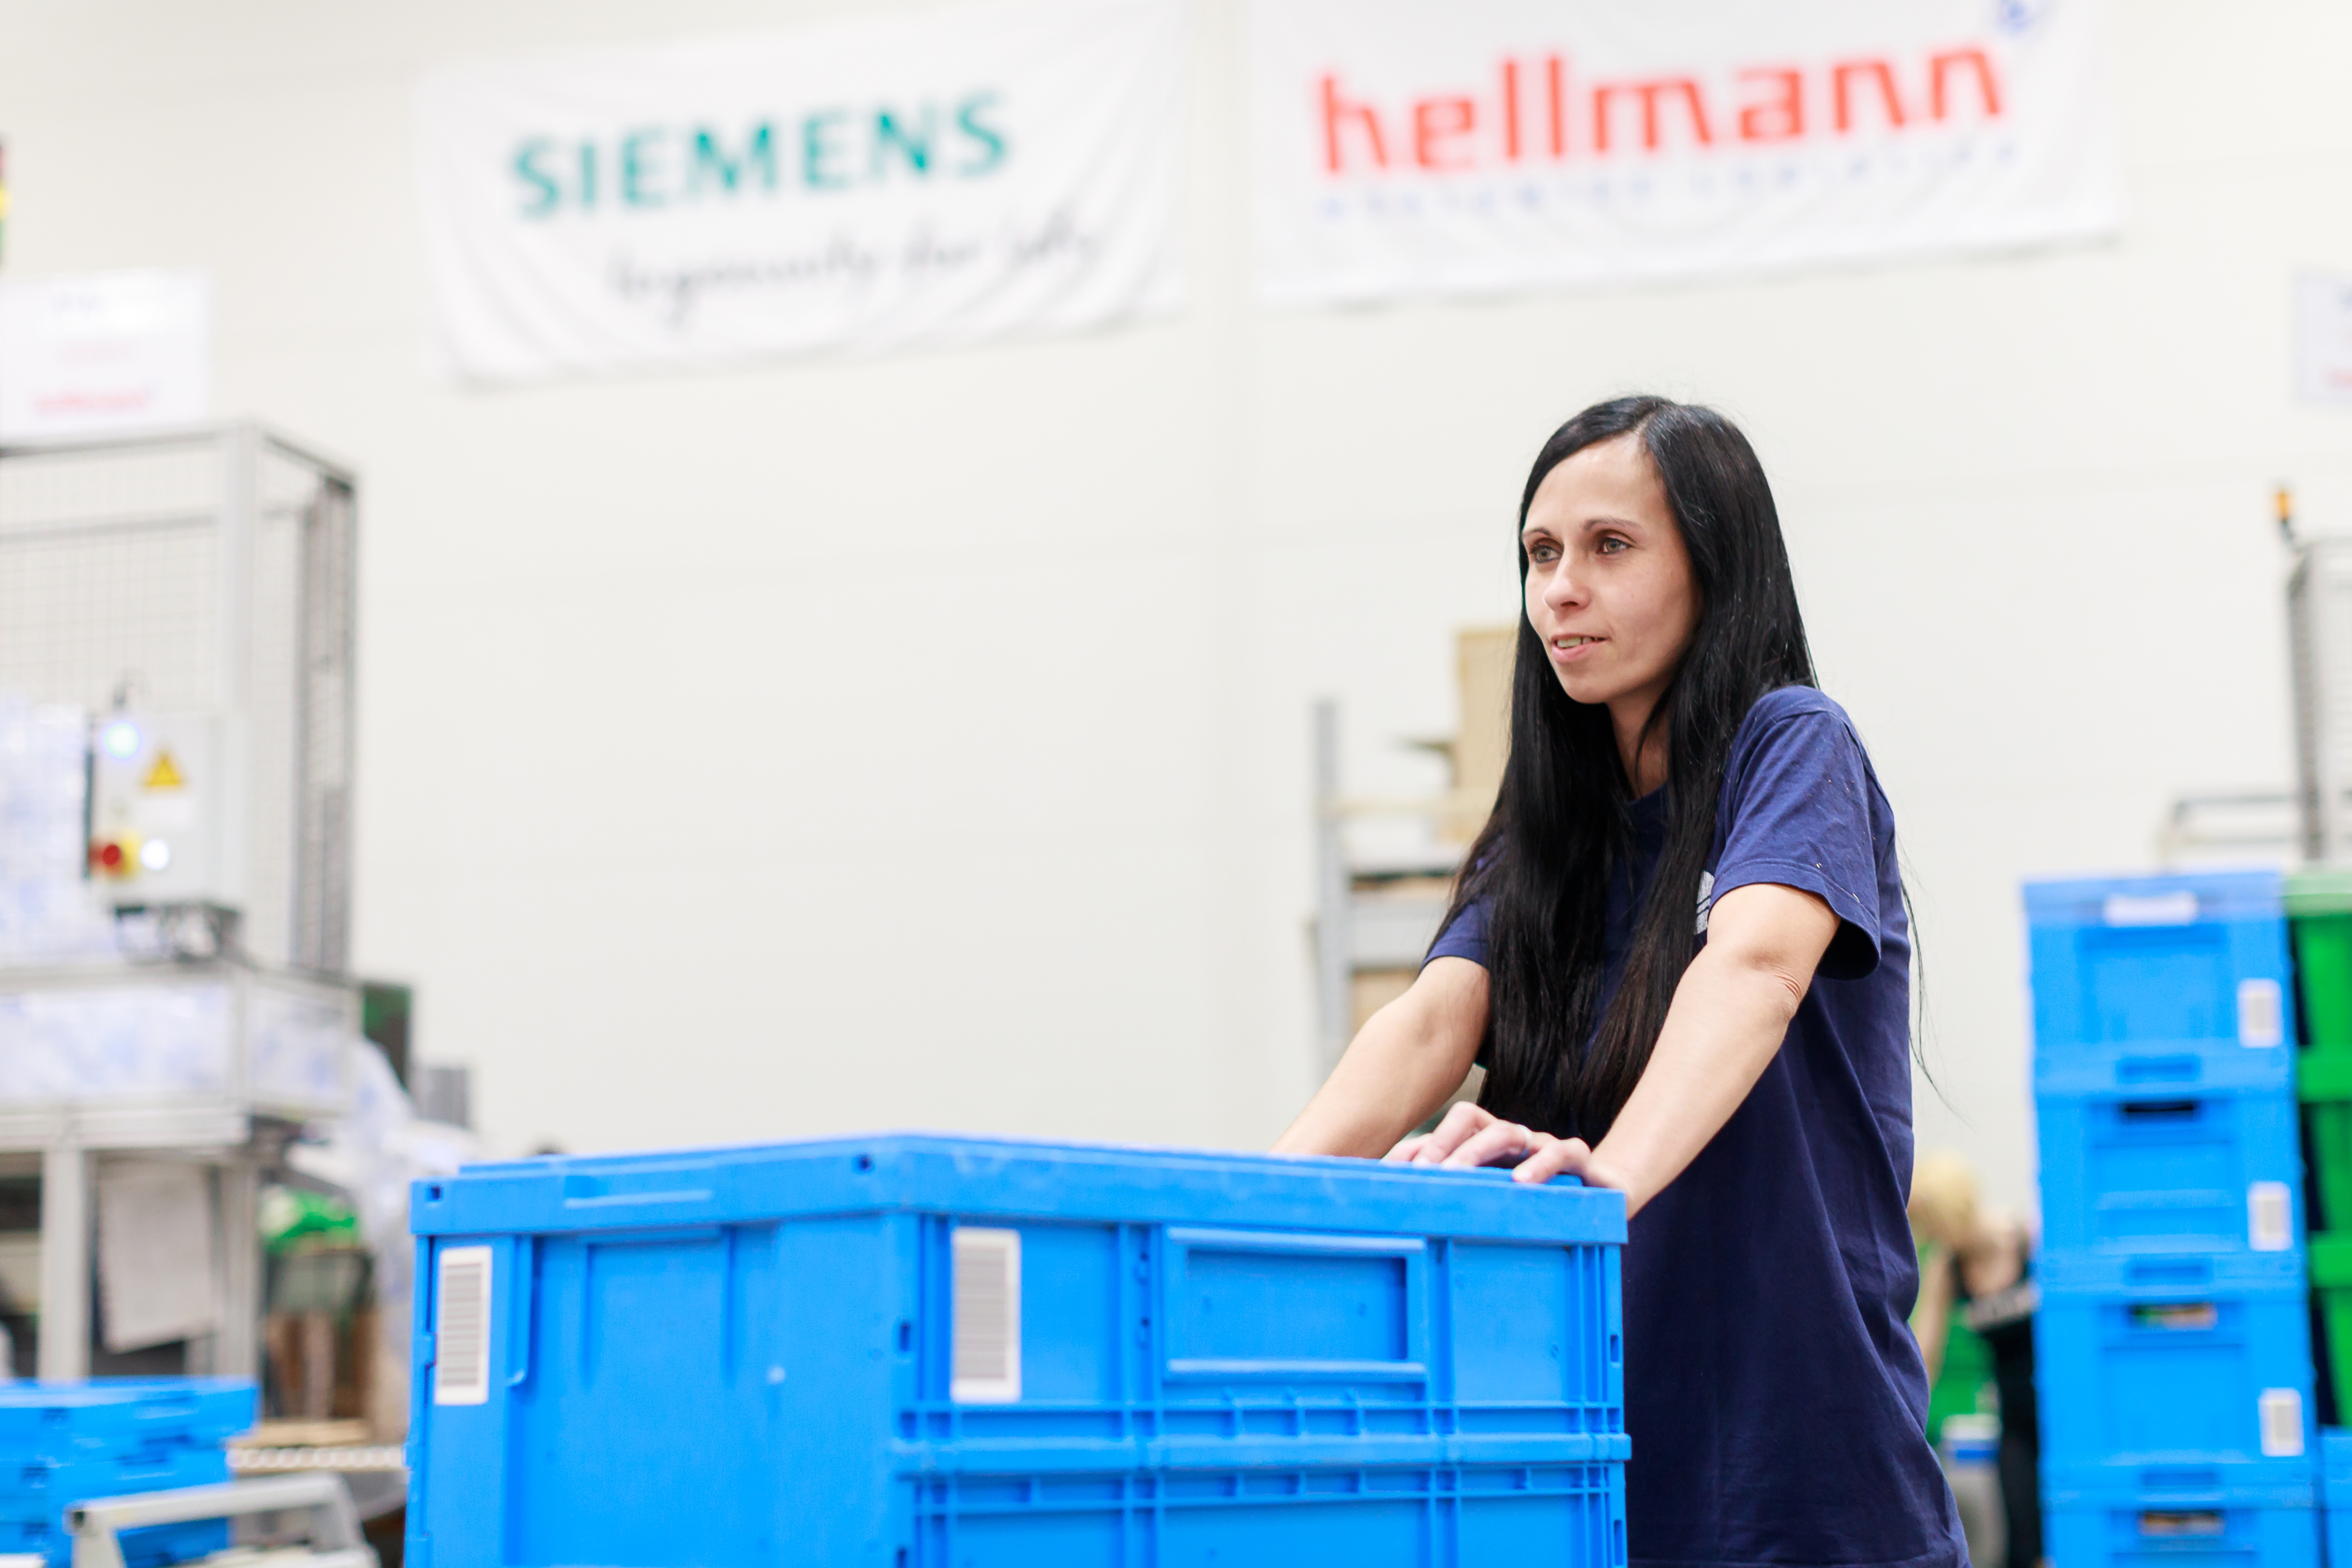 Hellmann remains the contract logistics partner of Siemens in the Czech Republic